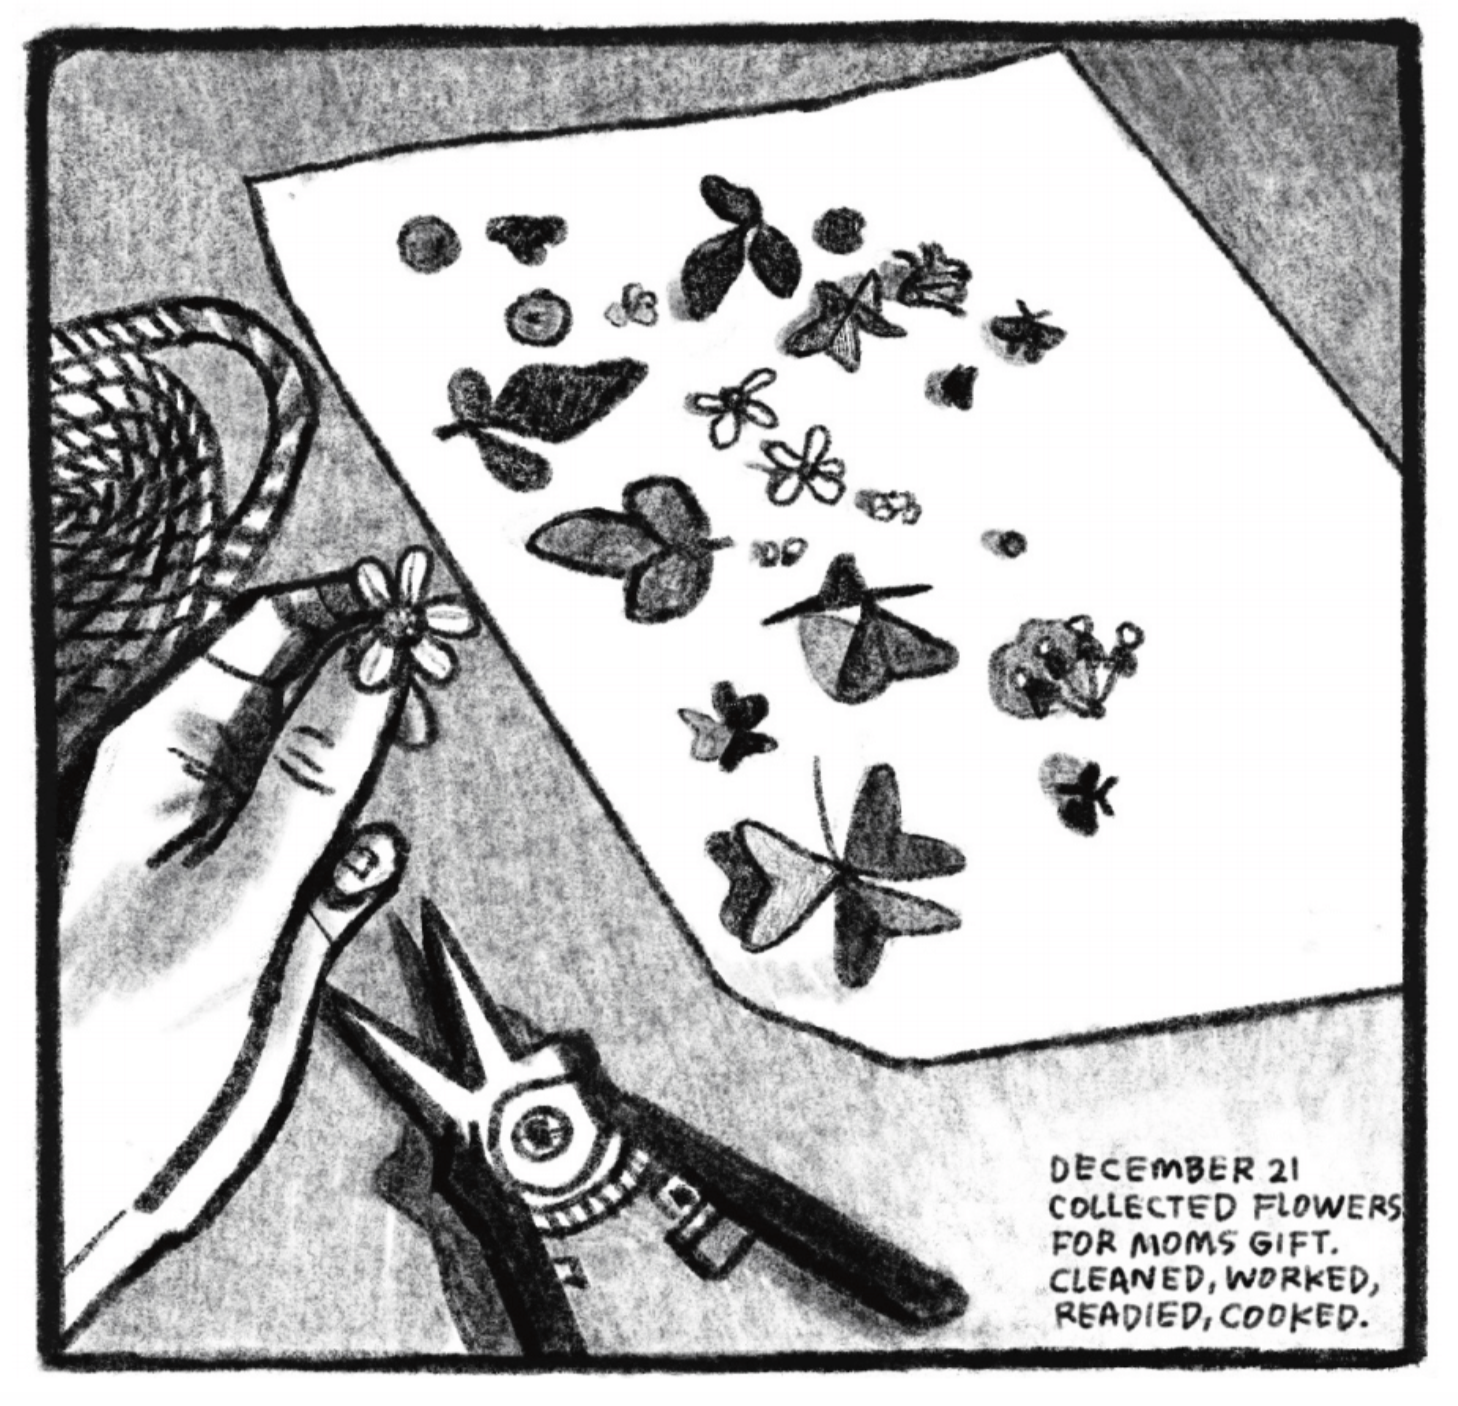 Kimâ€™s hand holds a little flower; in front of her is a sheet of paper covered with other little flowers of different types. Next to it is a pair of small shears. â€œDecember 21. Collected flowers for Momâ€™s gift. Cleaned, worked, readied, cooked.â€